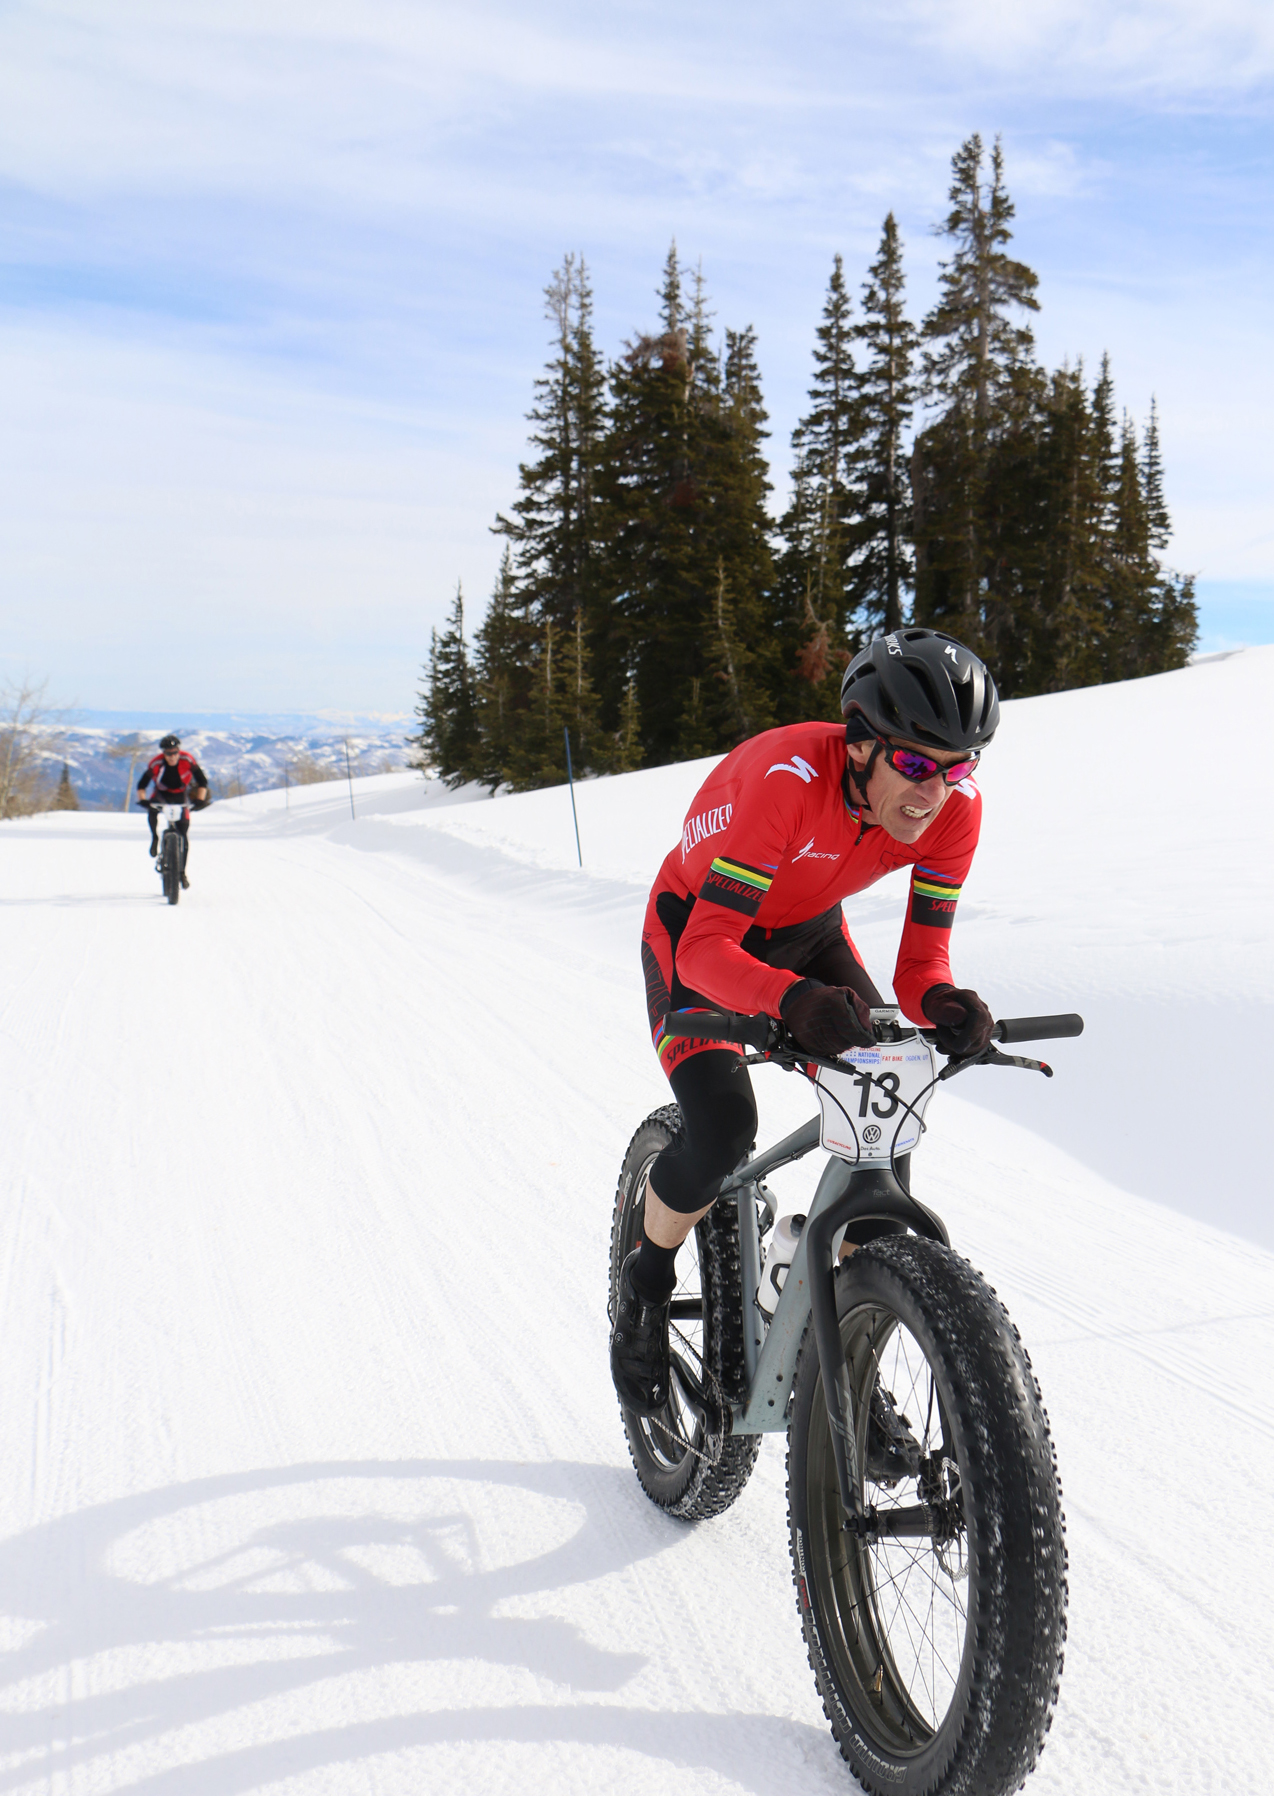 Ned Overend in the midst of a devastating last lap attack on his way to winning the pro Fat Bike National Championship at Powder Mountain on February 14, 2015. Photo by Dave Iltis